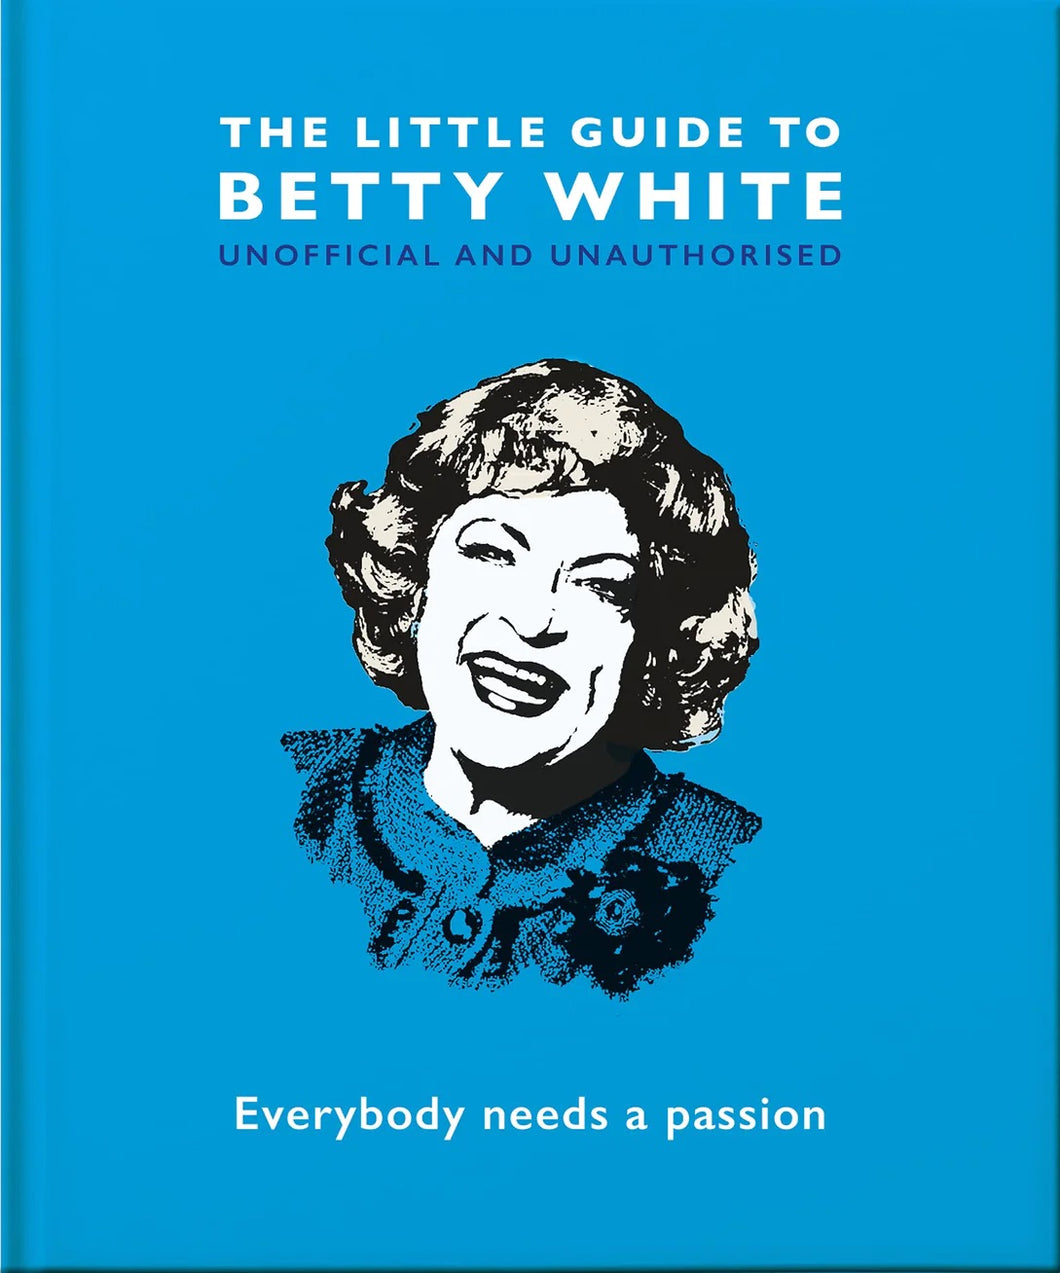 The Little Guide To Betty White: Everybody needs a passion